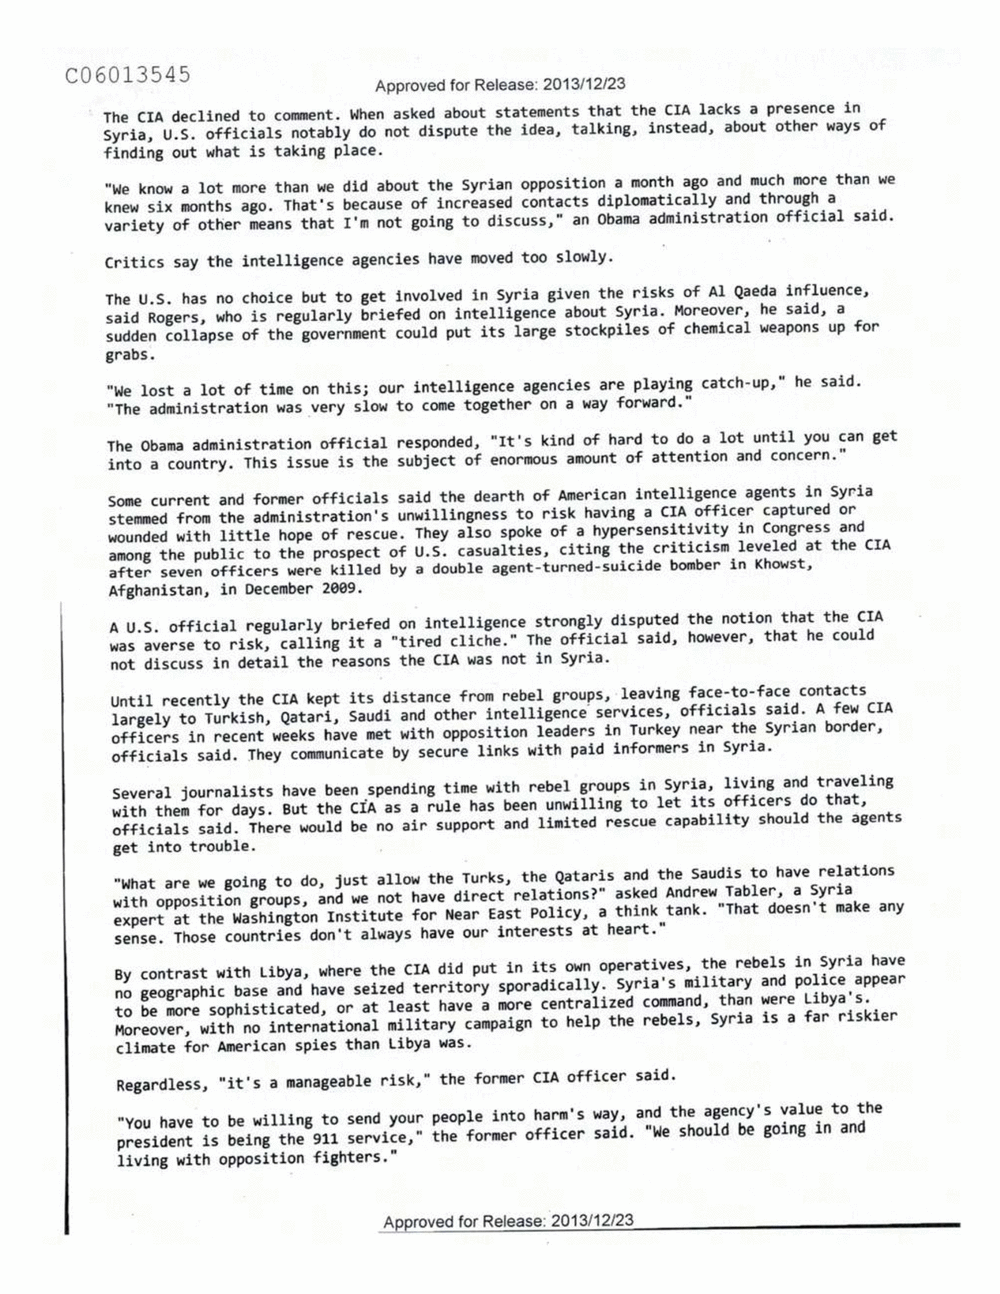 Page 406 from Email Correspondence Between Reporters and CIA Flacks